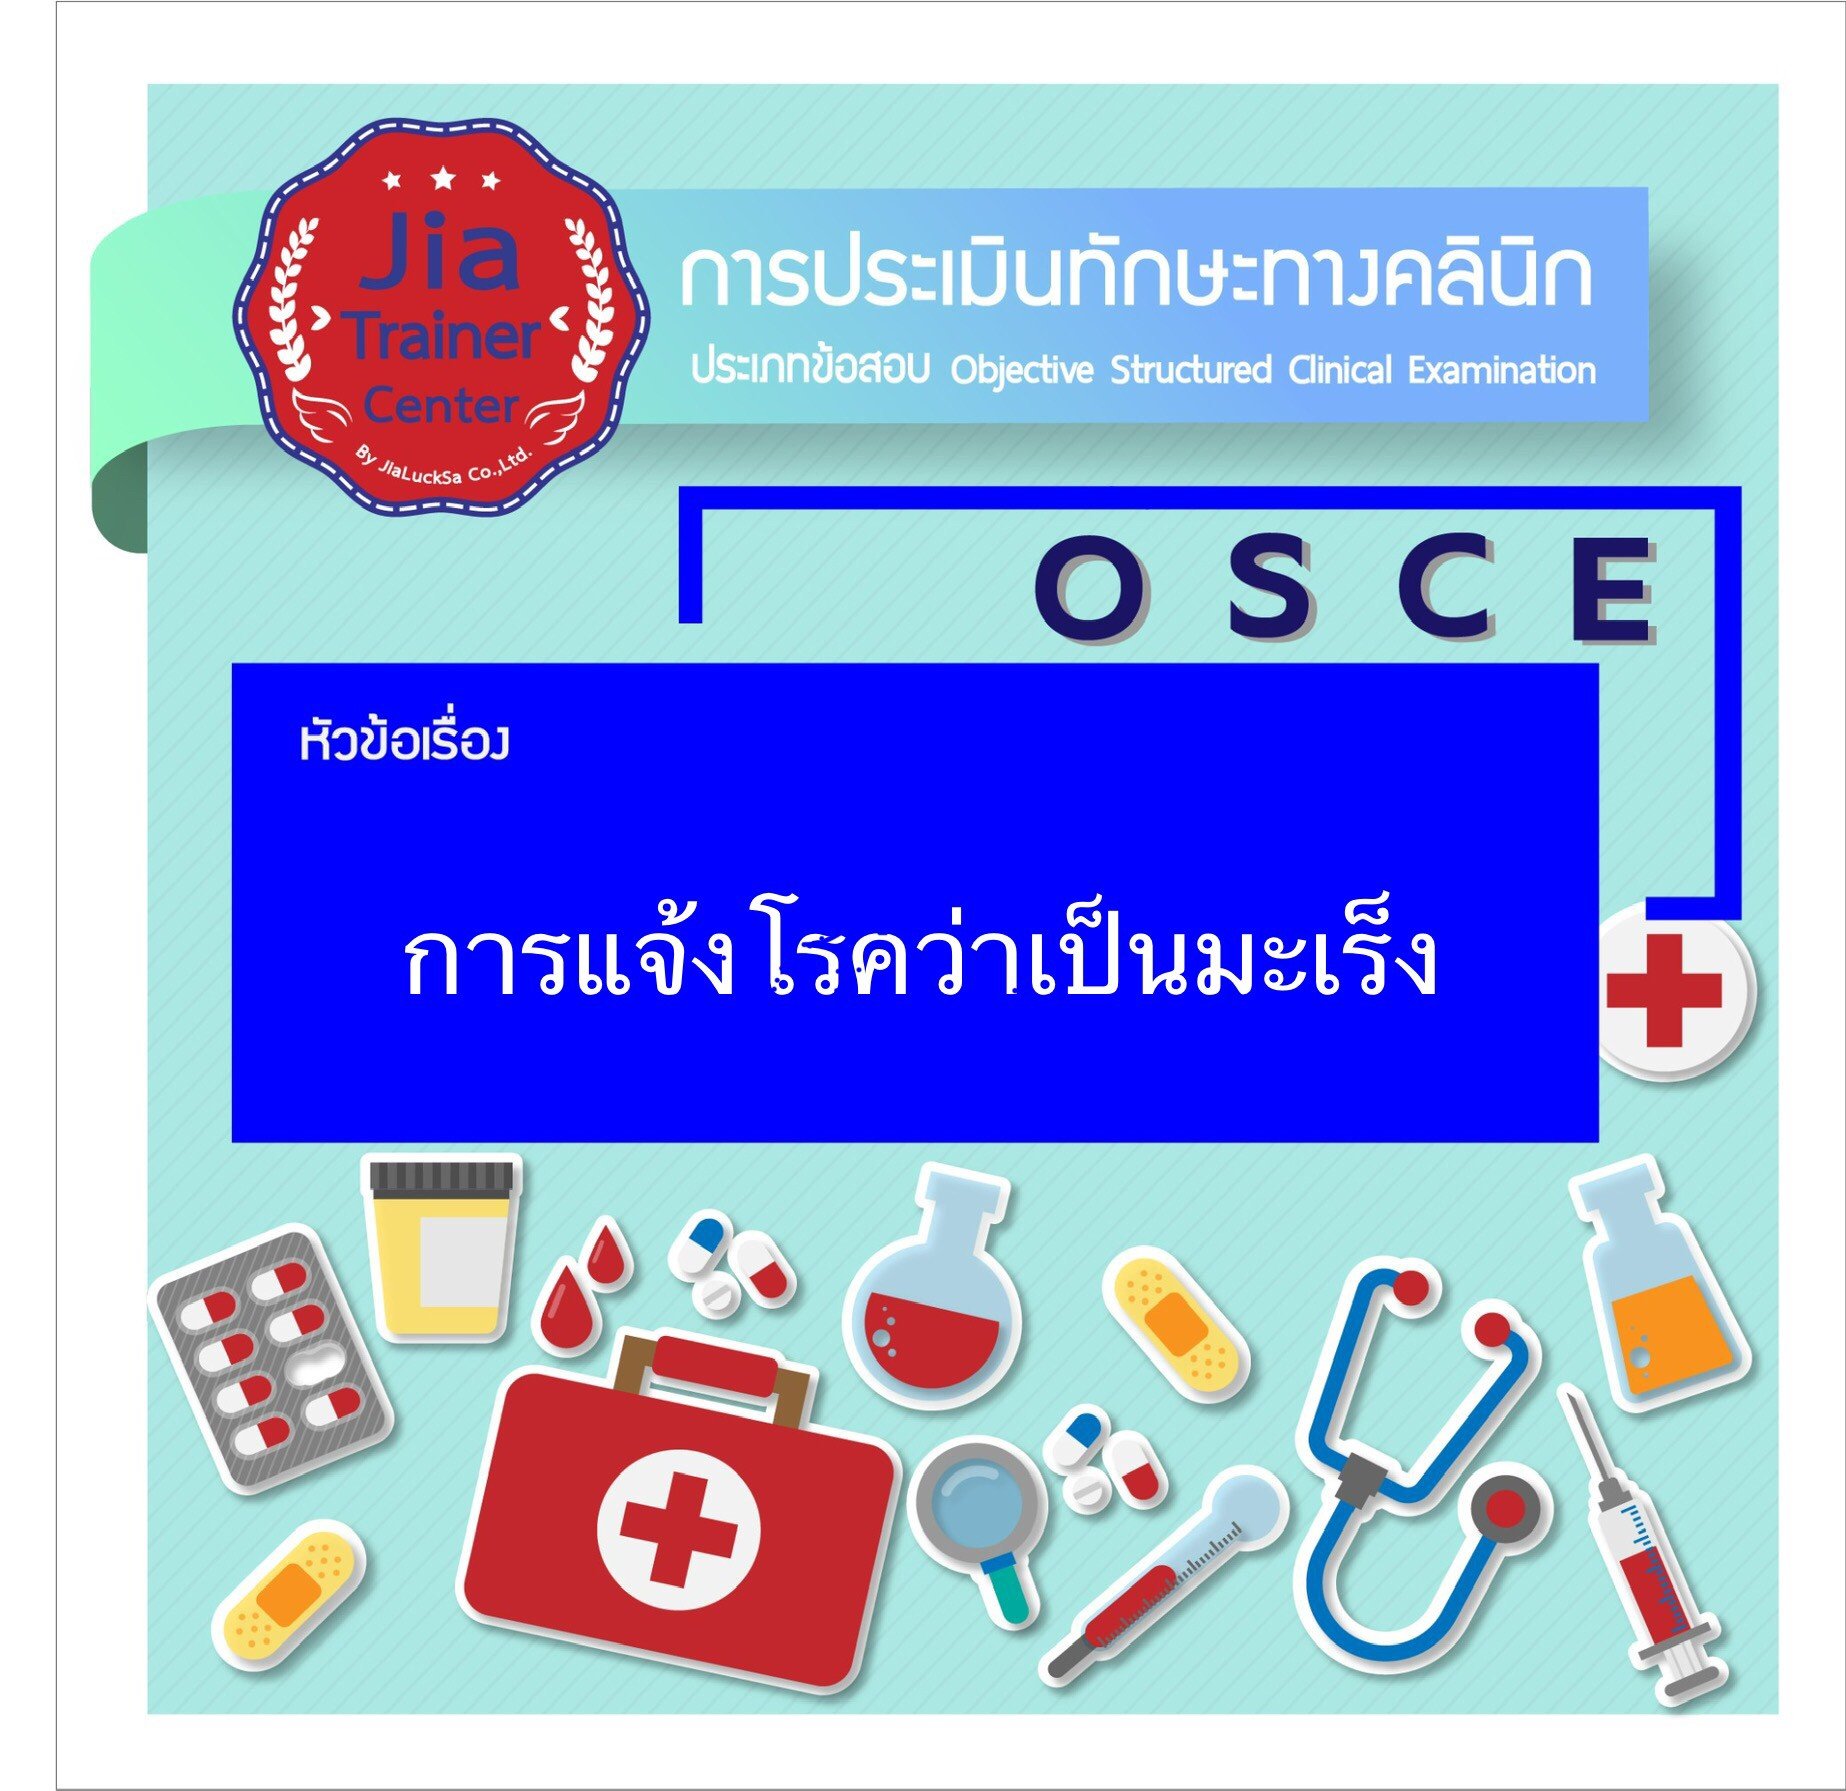 Osce-Reporting the disease as cancer